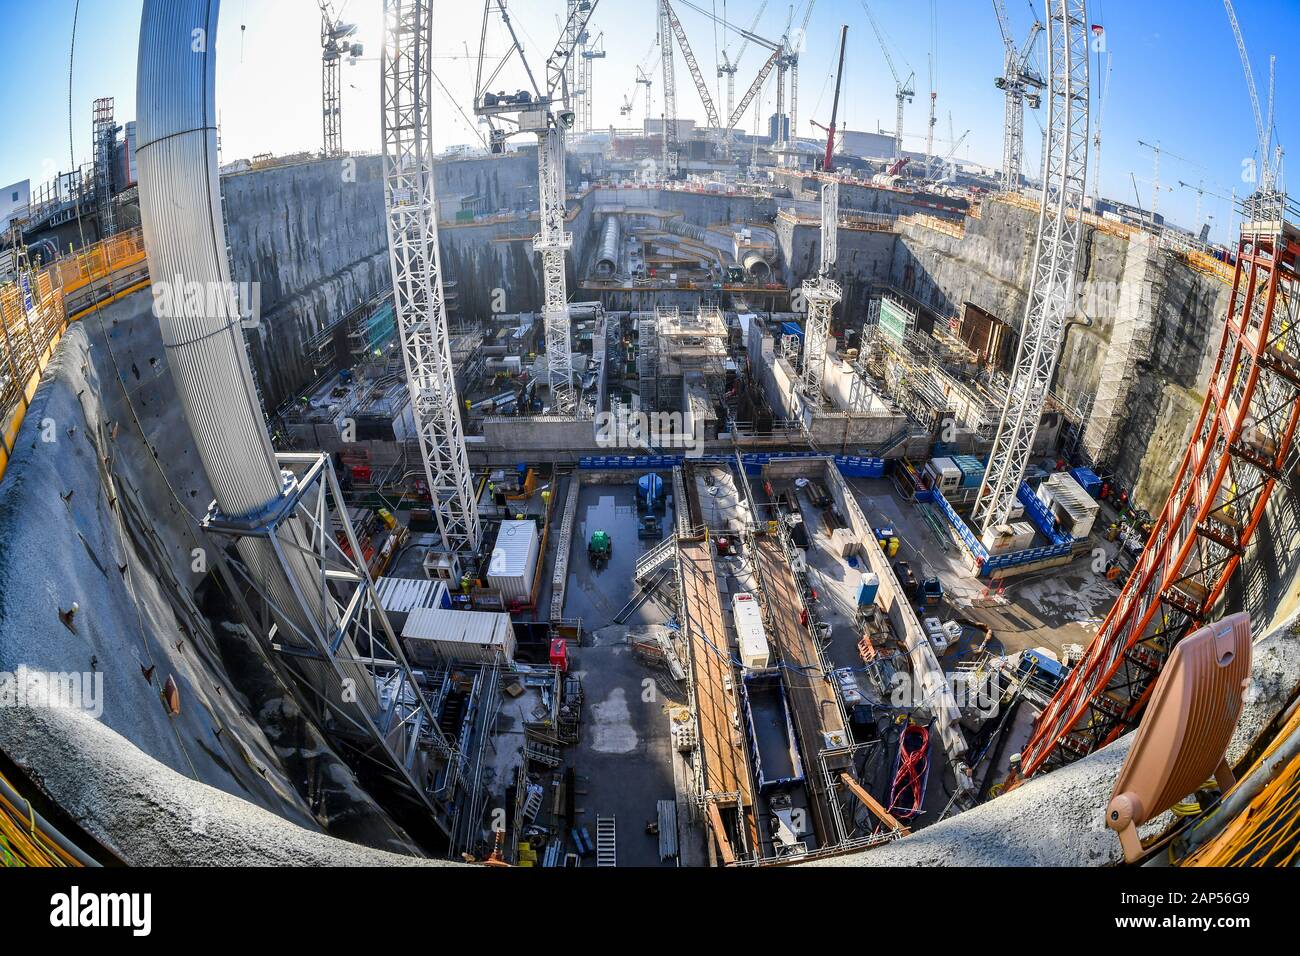 Huge cranes rise up from a deep-dig sectionthat forms part of the cooling network during construction work at Hinkley Point C nuclear power station near Bridgwater, Somerset, where 4,700 workers continue on Europe's largest building site. Stock Photo